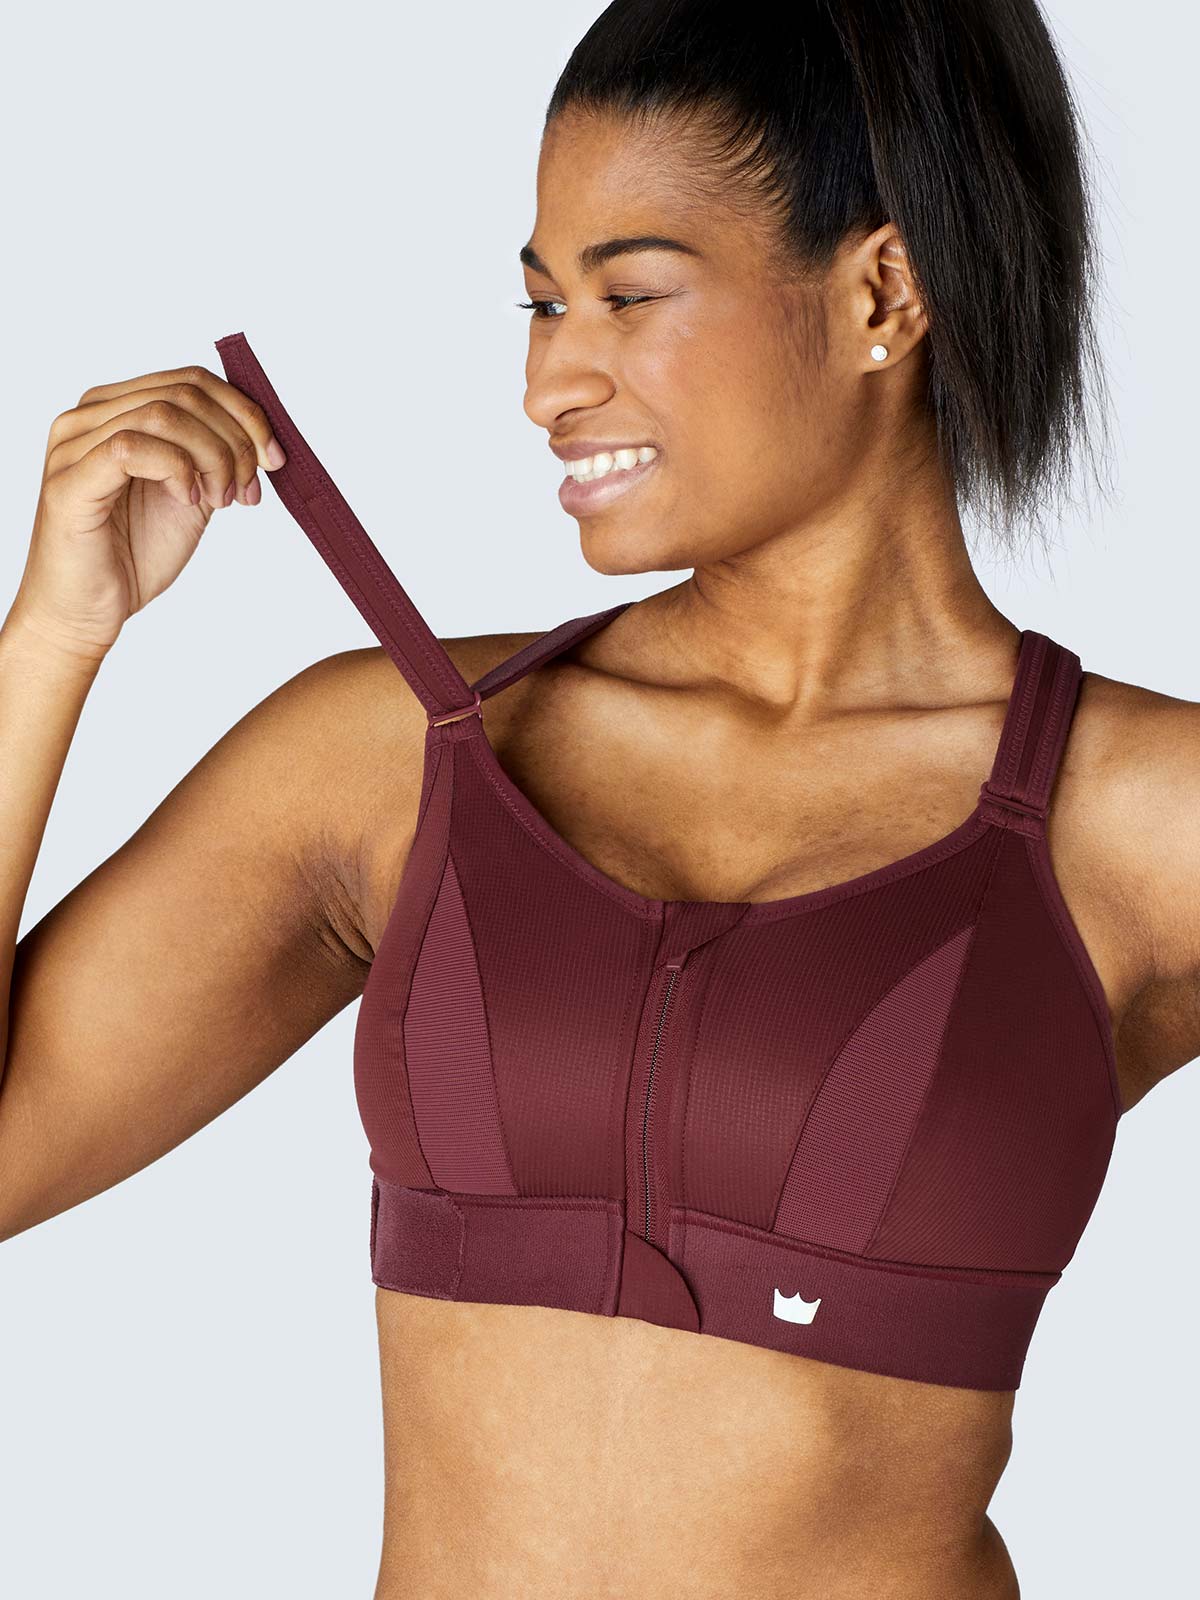 SHEFIT® Ultimate Sports Bra - Confident. Out Now!  Add a little Confidence  and your next workout will get Boss'd! The first of three in our Boss'd  Collection has been fully funded